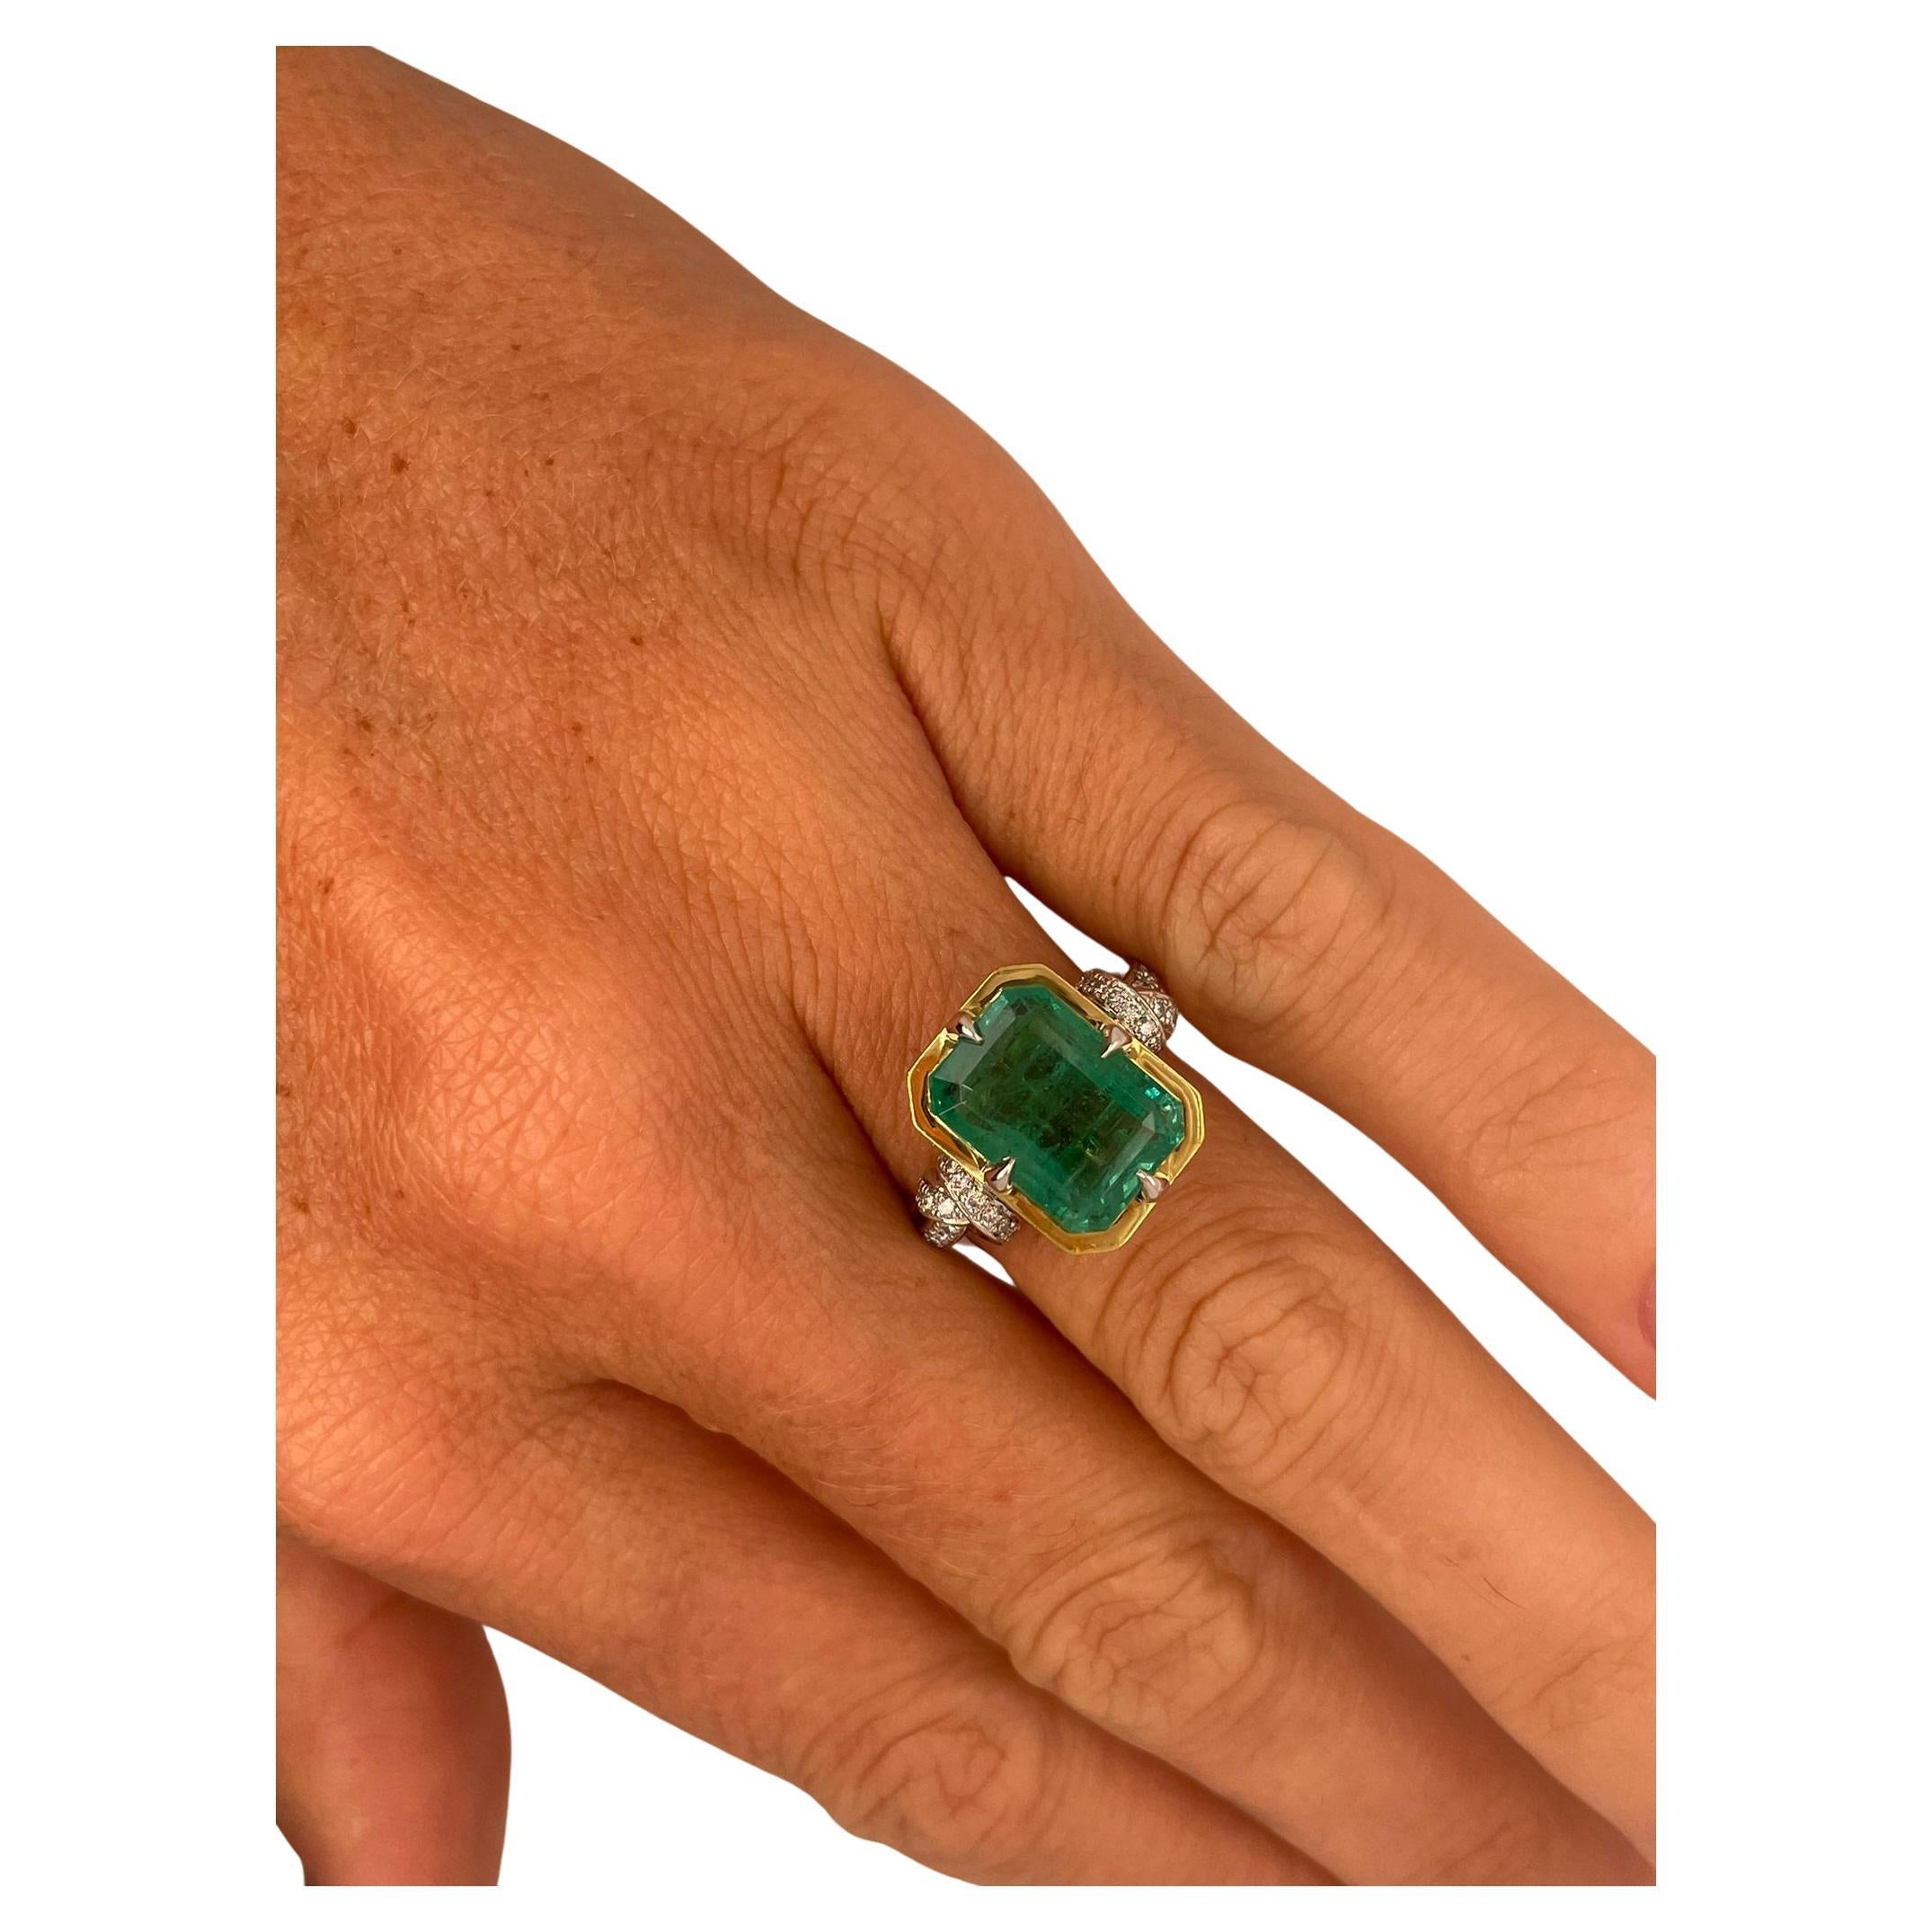 Artist 5.79 Carat Zambian Emerald in Forget Me Knot Style Ring with Diamonds